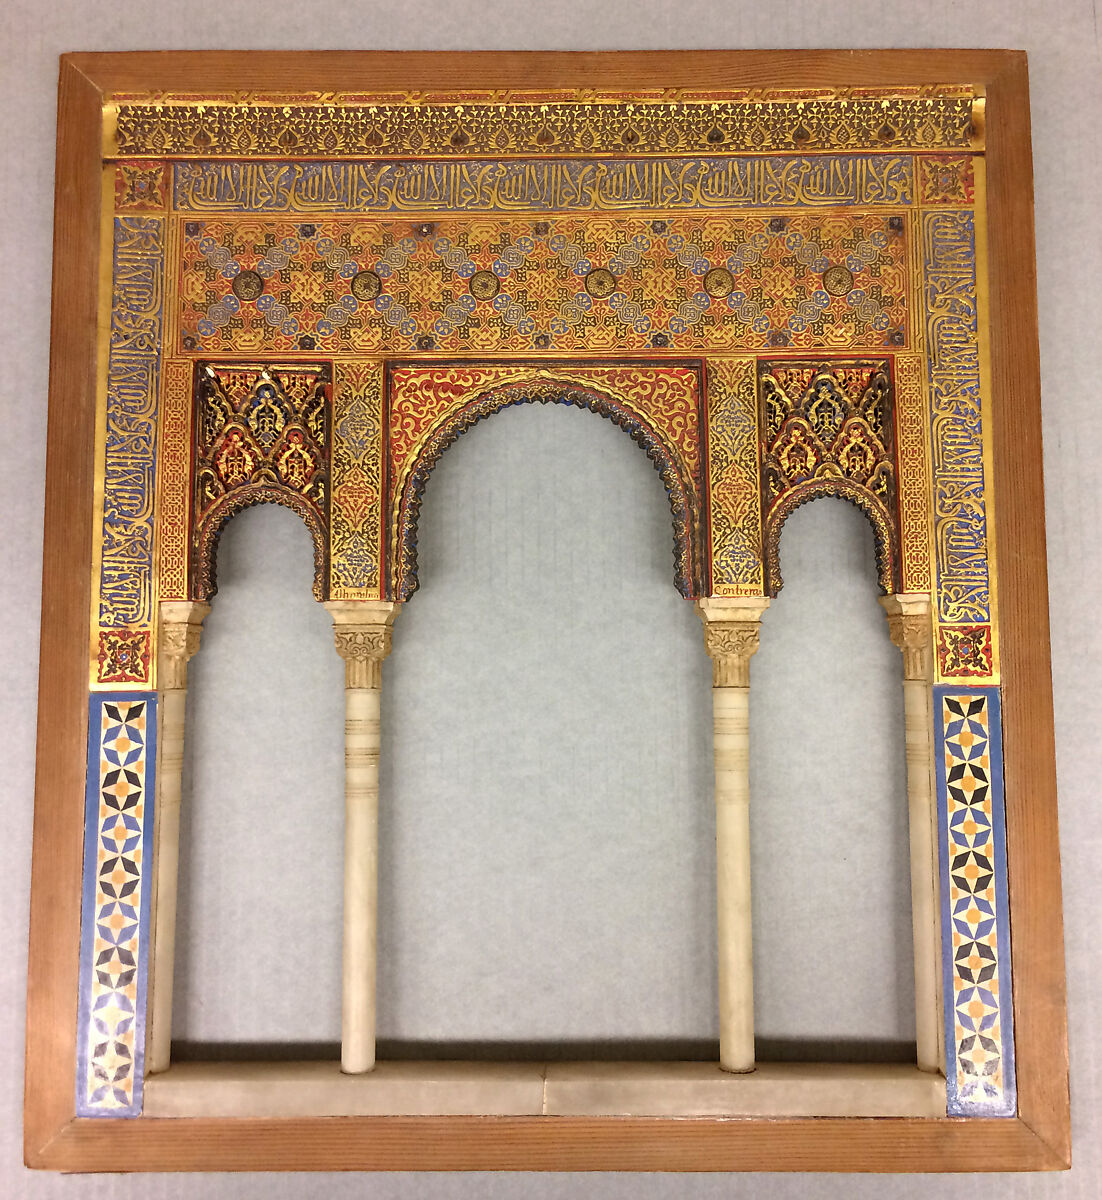 Architectural Model based on the Alhambra, Rafael Contreras (Spanish), Plaster colored, alabaster, bisque 